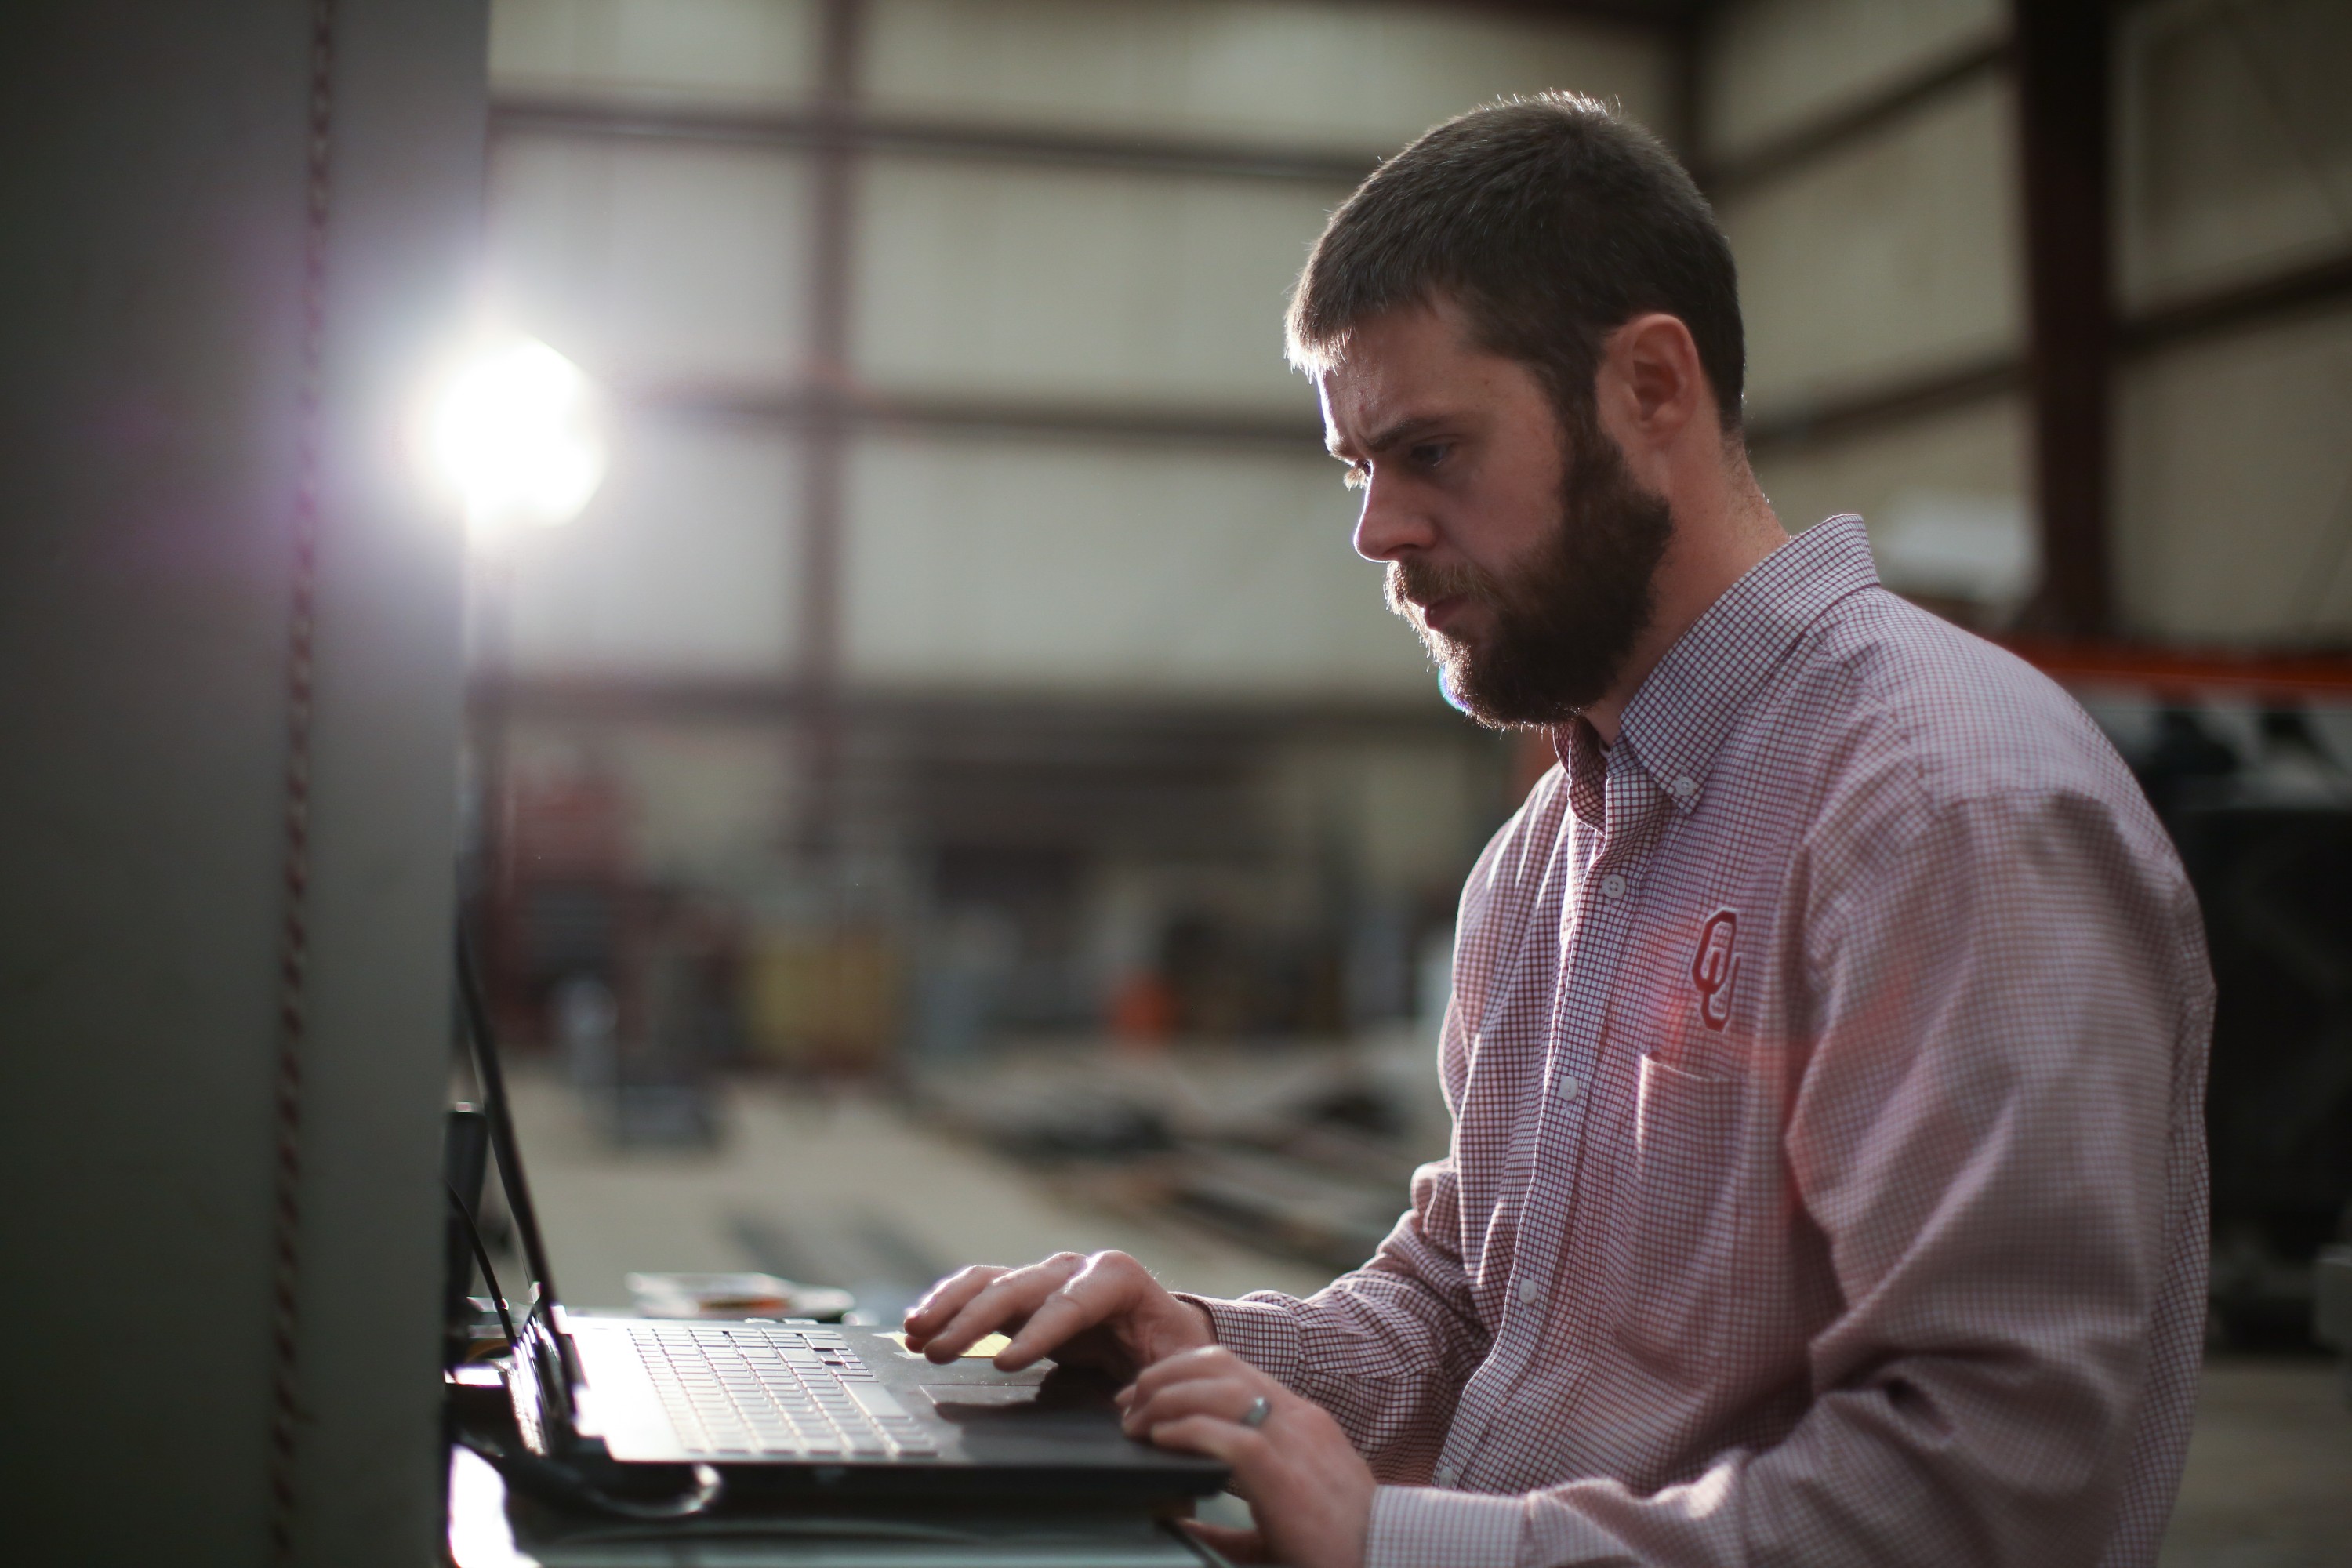 An OU Engineer at Fears Lab works on his laptop.